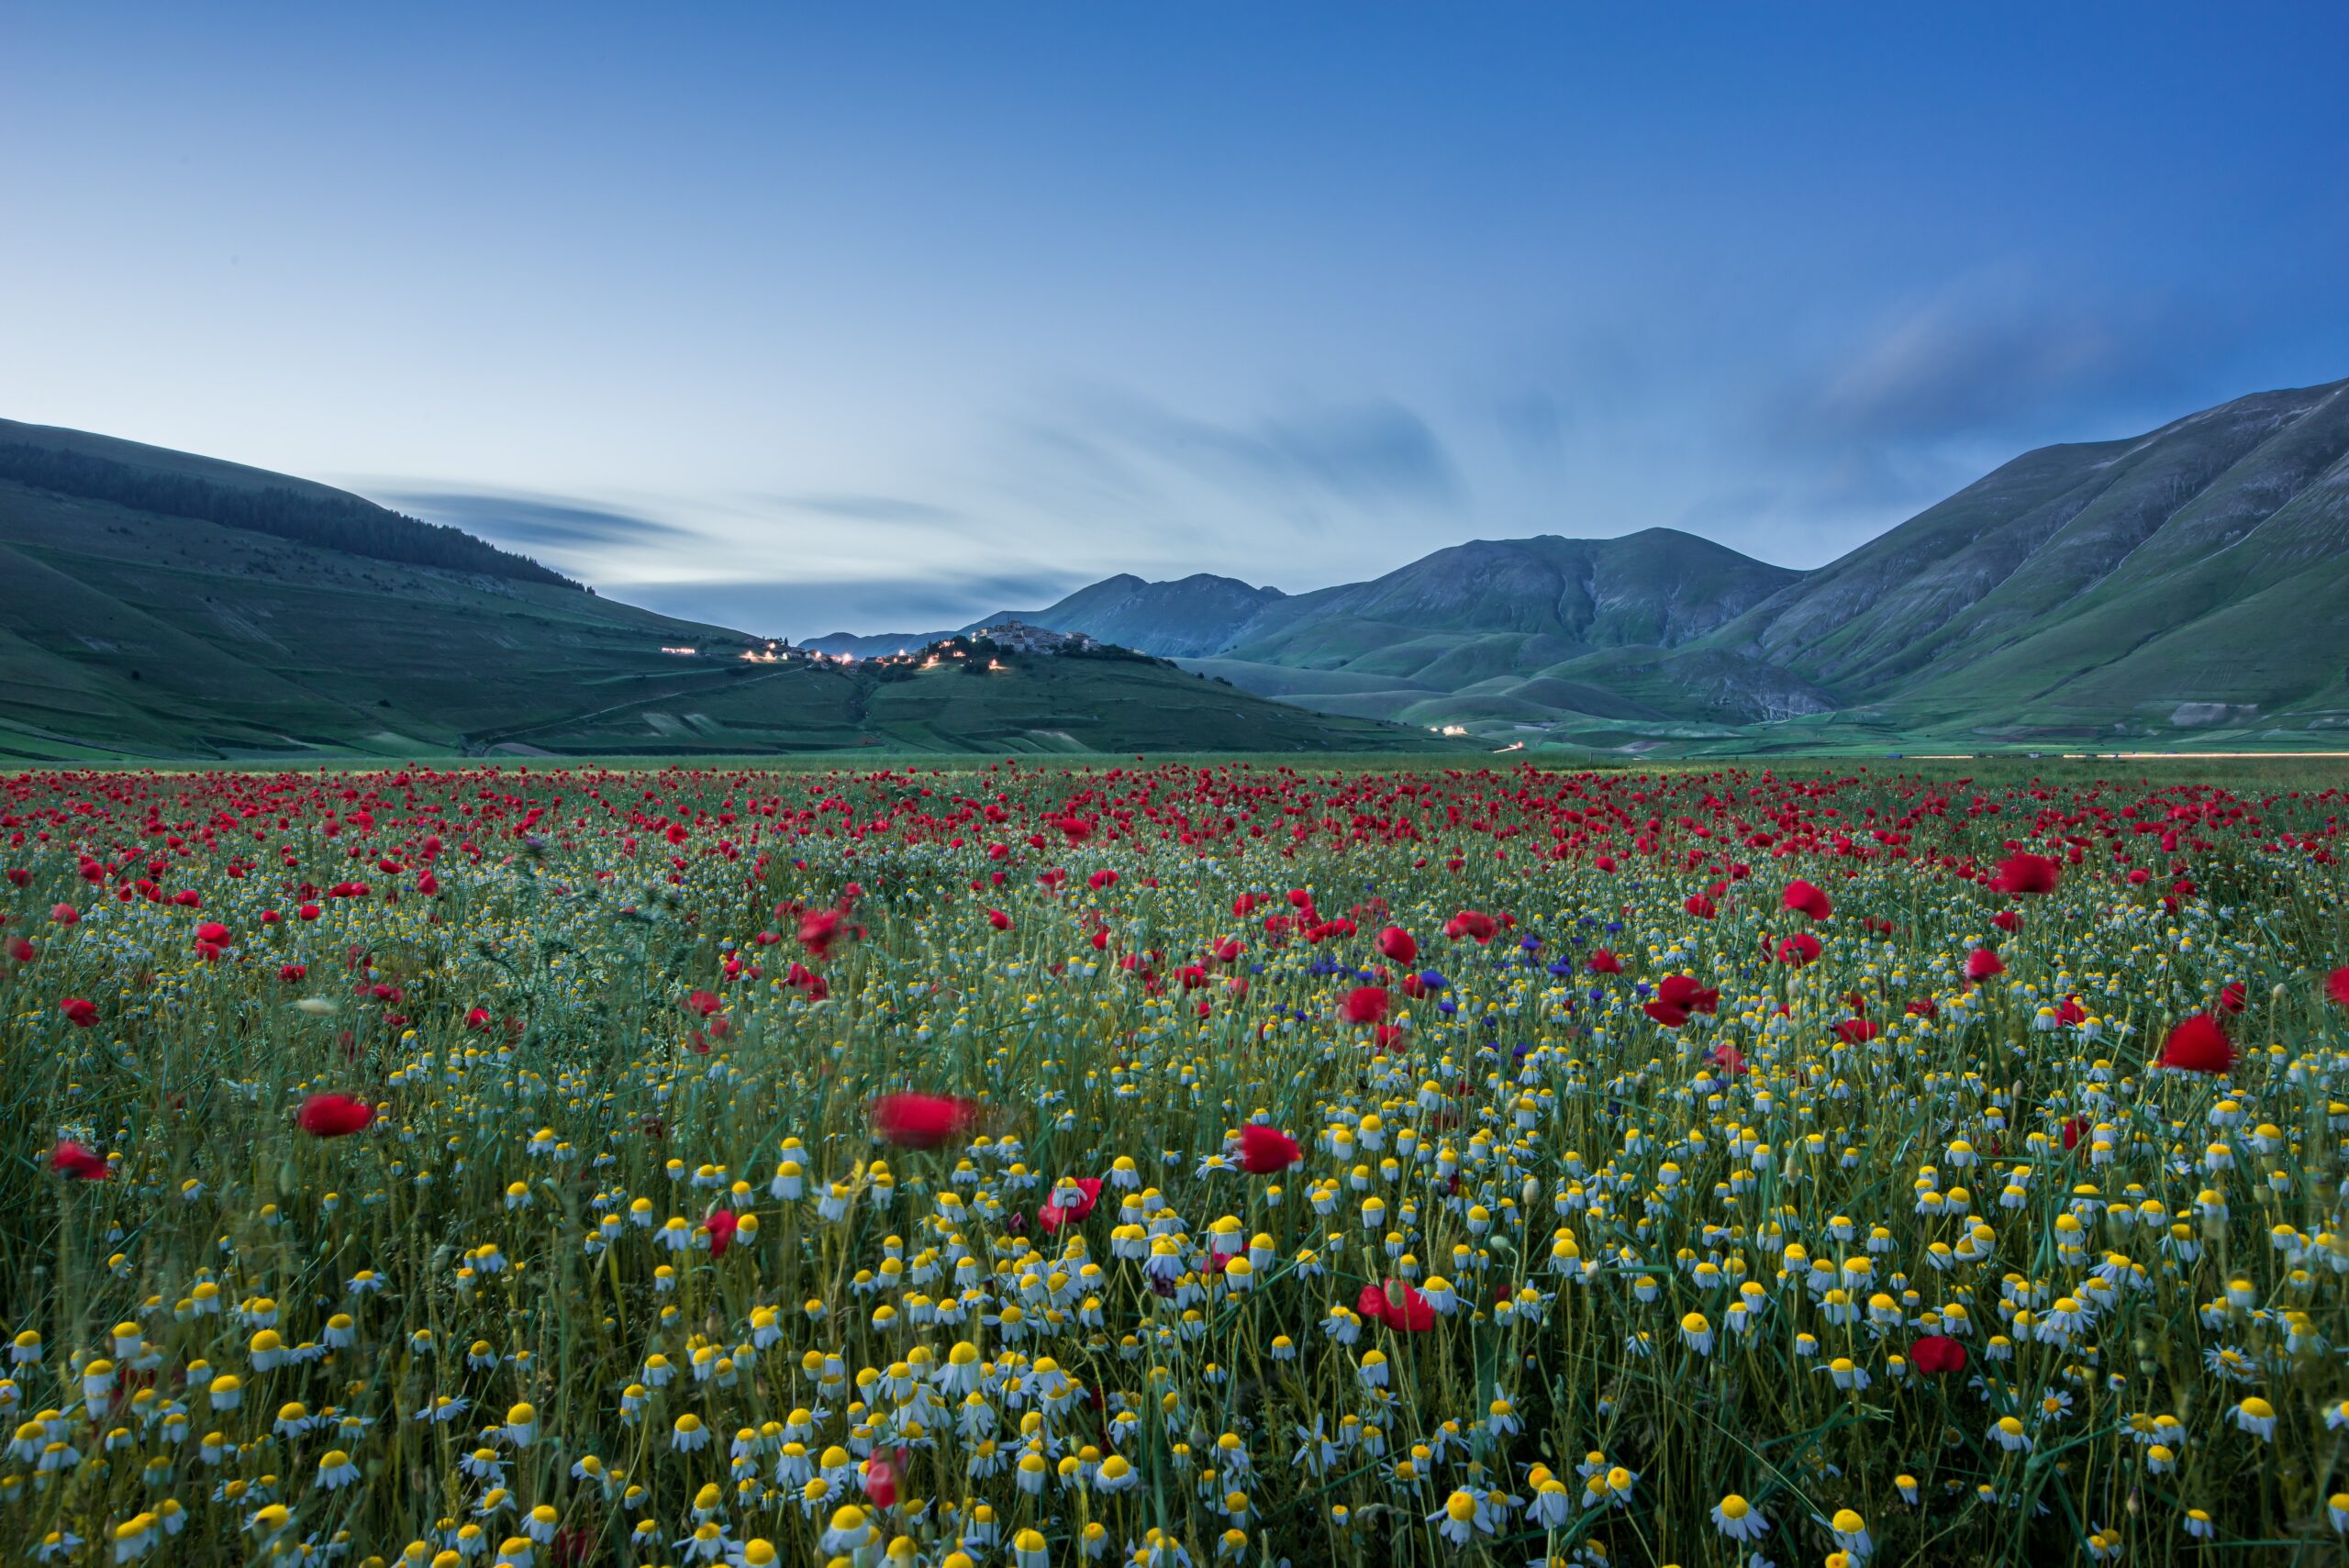 https://allthatbach.com/wp-content/uploads/2024/01/horizontal-shot-huge-field-with-lot-flowers-red-tulips-surrounded-by-high-mountains-scaled.jpg